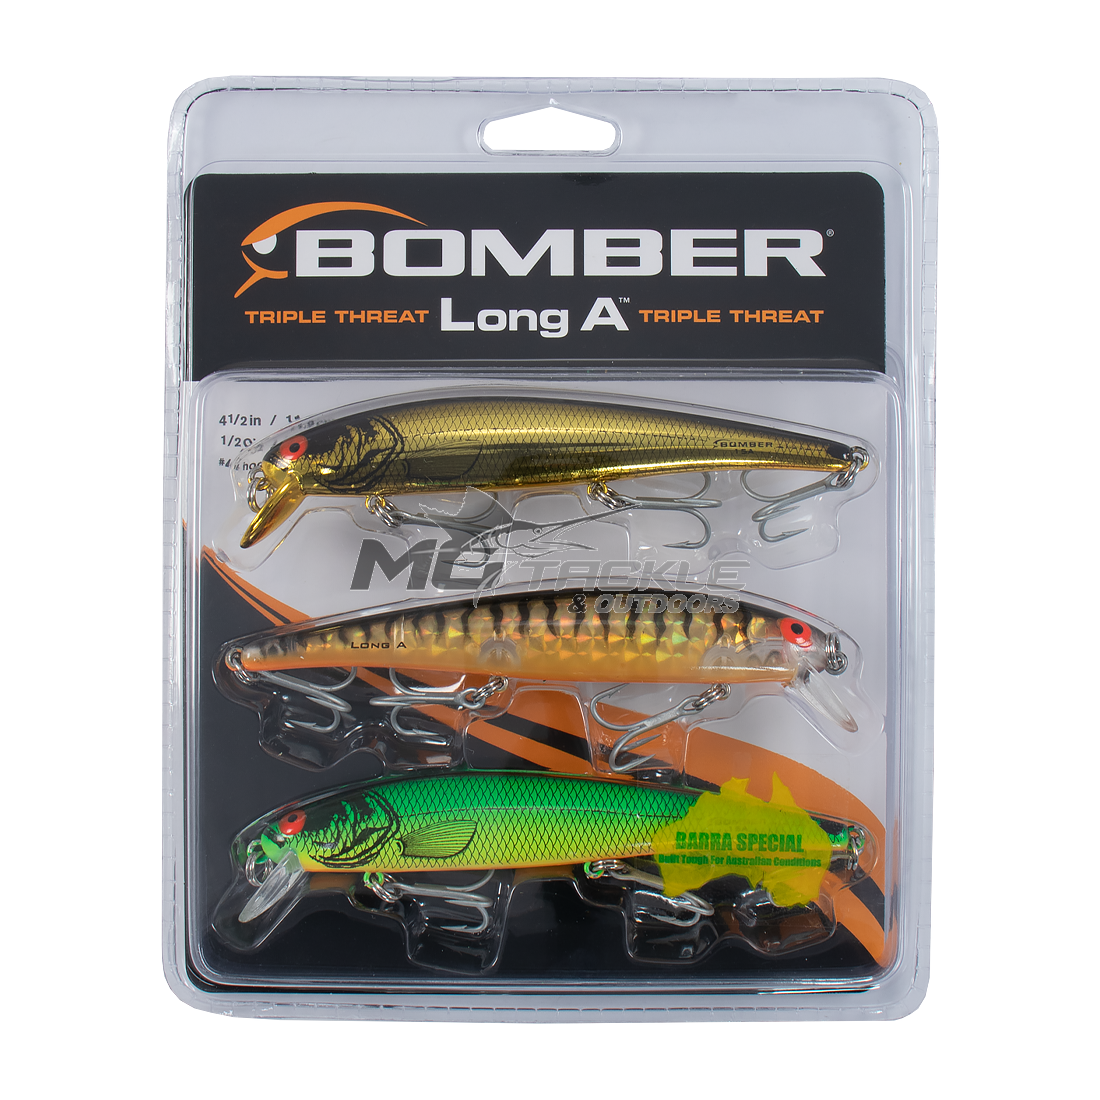 Bomber Long A Lure